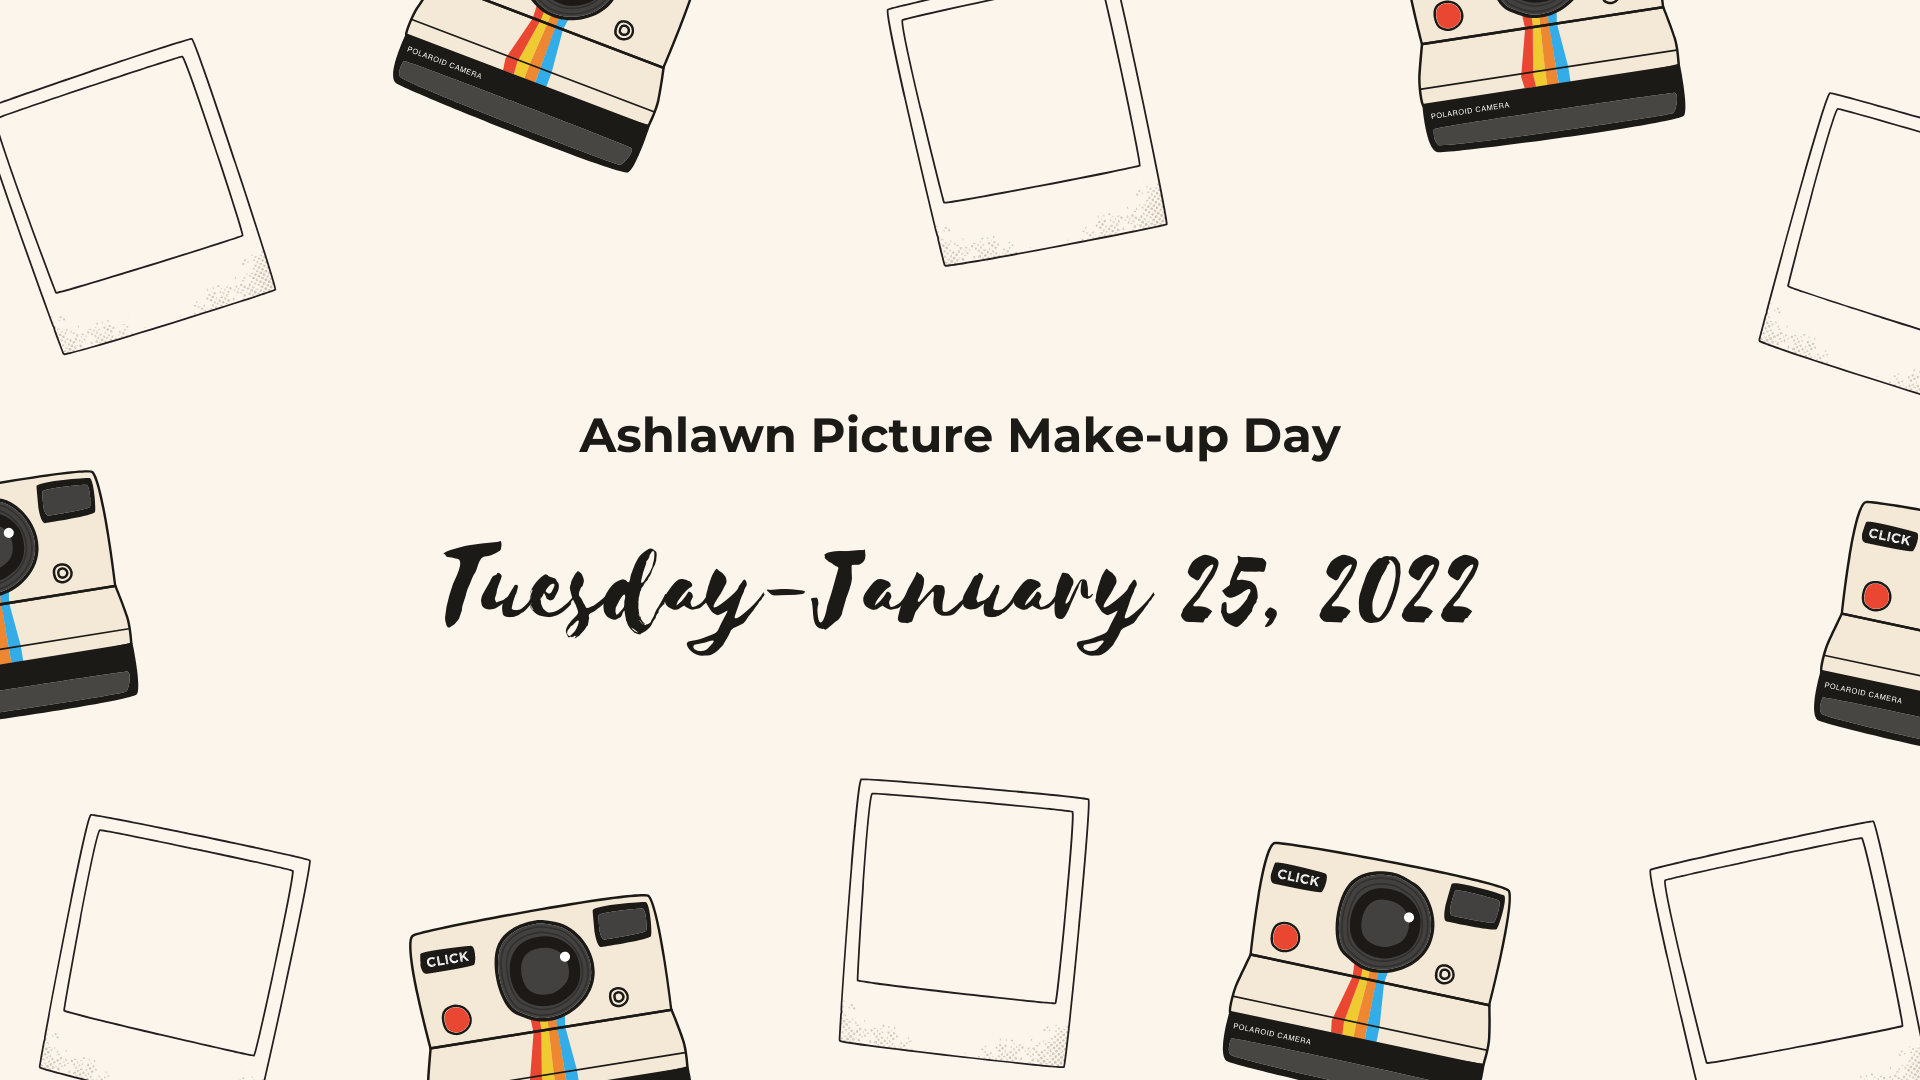 Ashlawn Picture Make-up Day: Jan. 25th